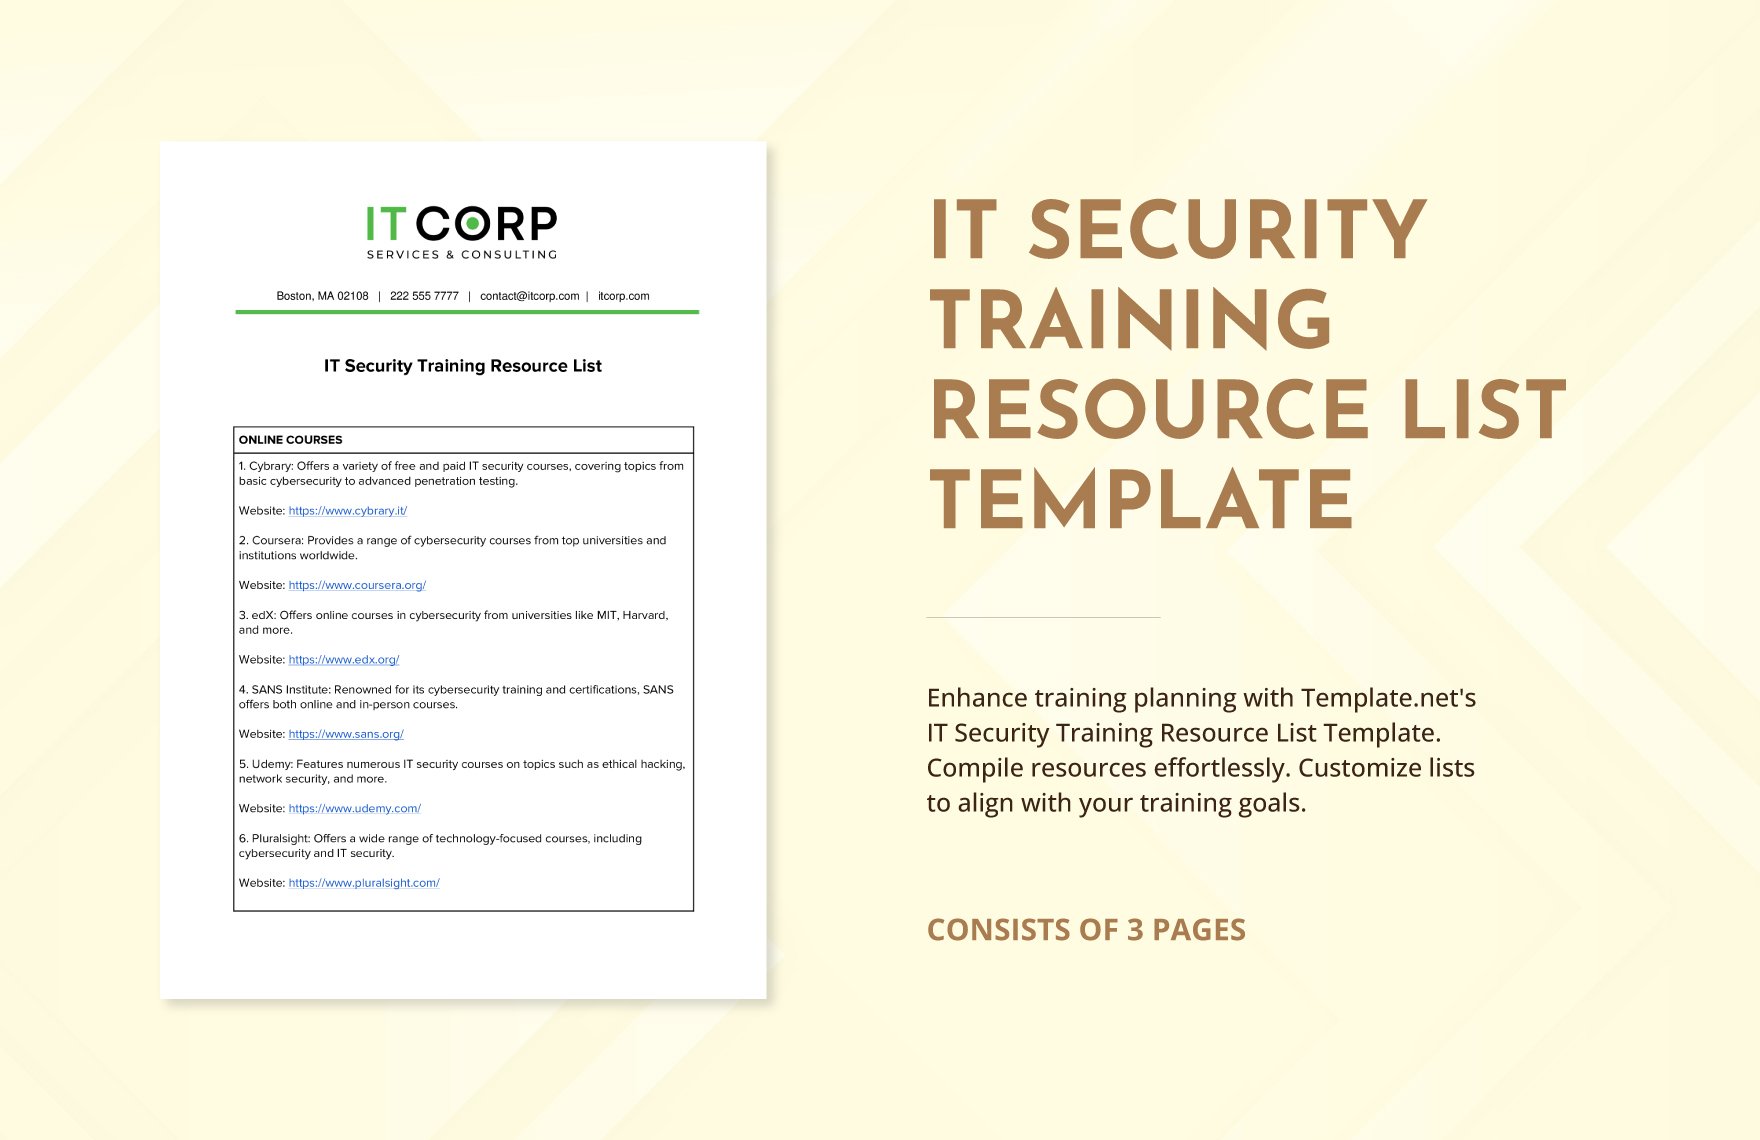 IT Security Training Resource List Template in Word, Google Docs, PDF